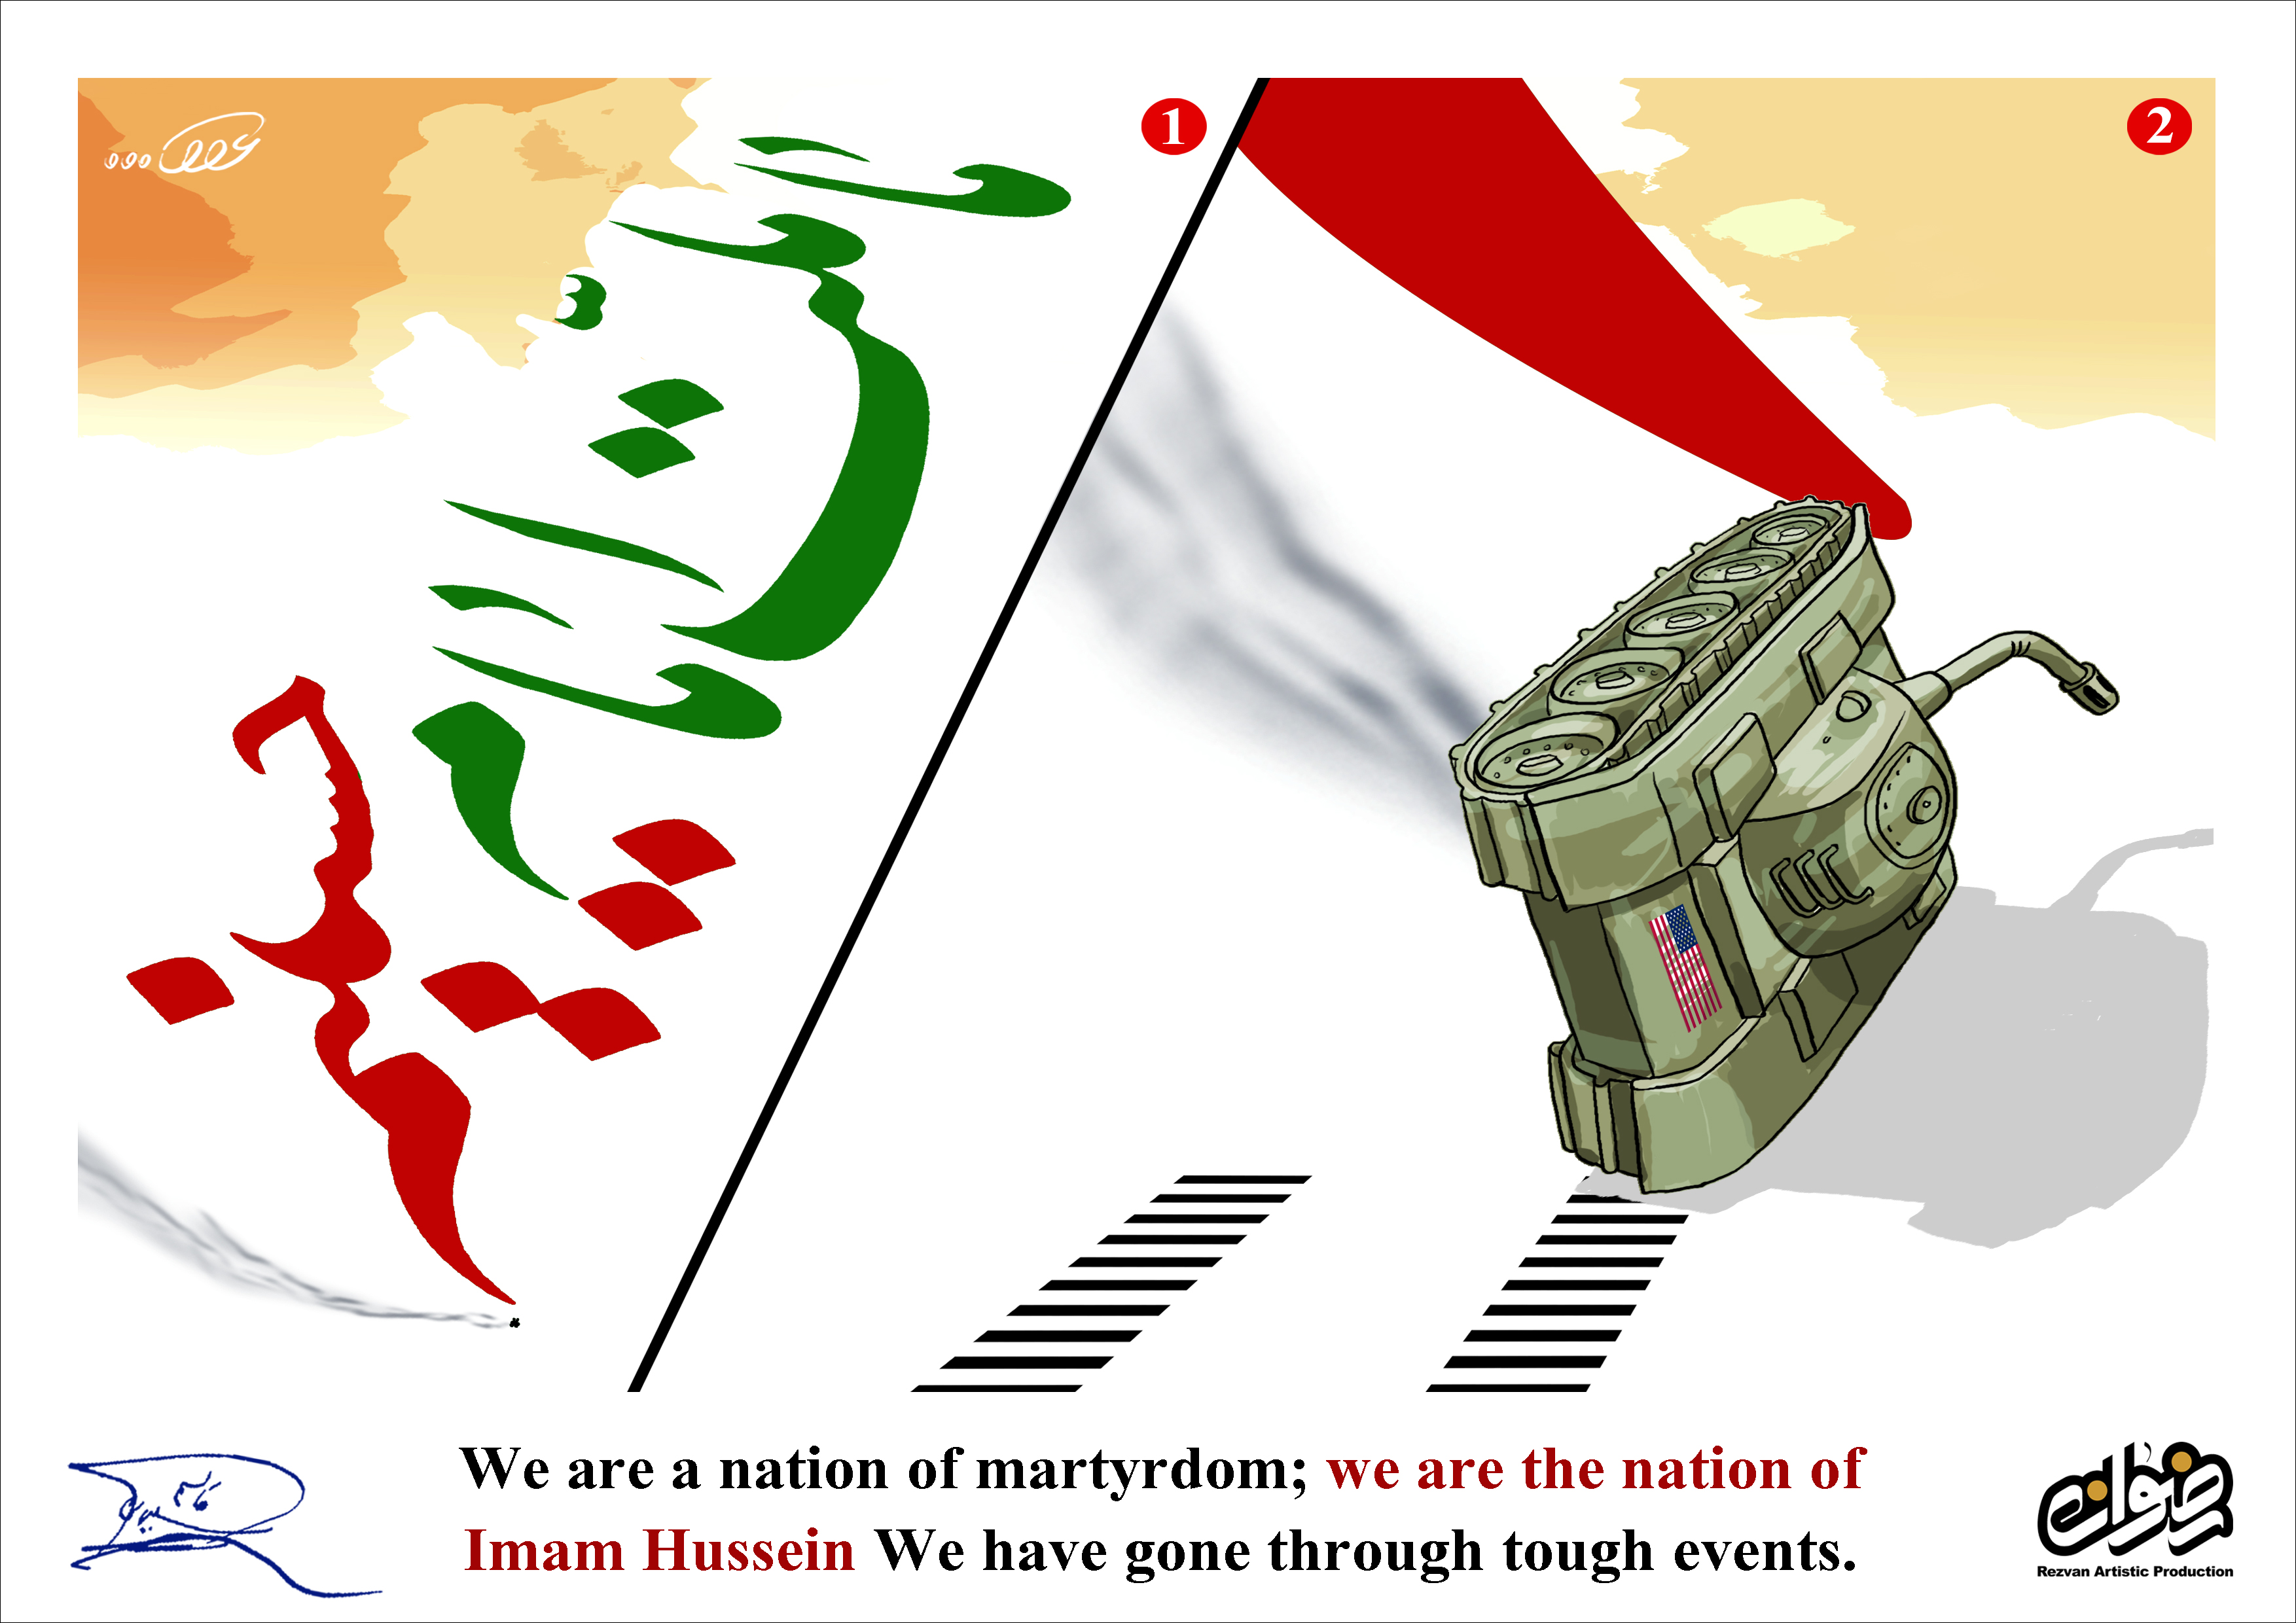 We are a nation of martyrdom